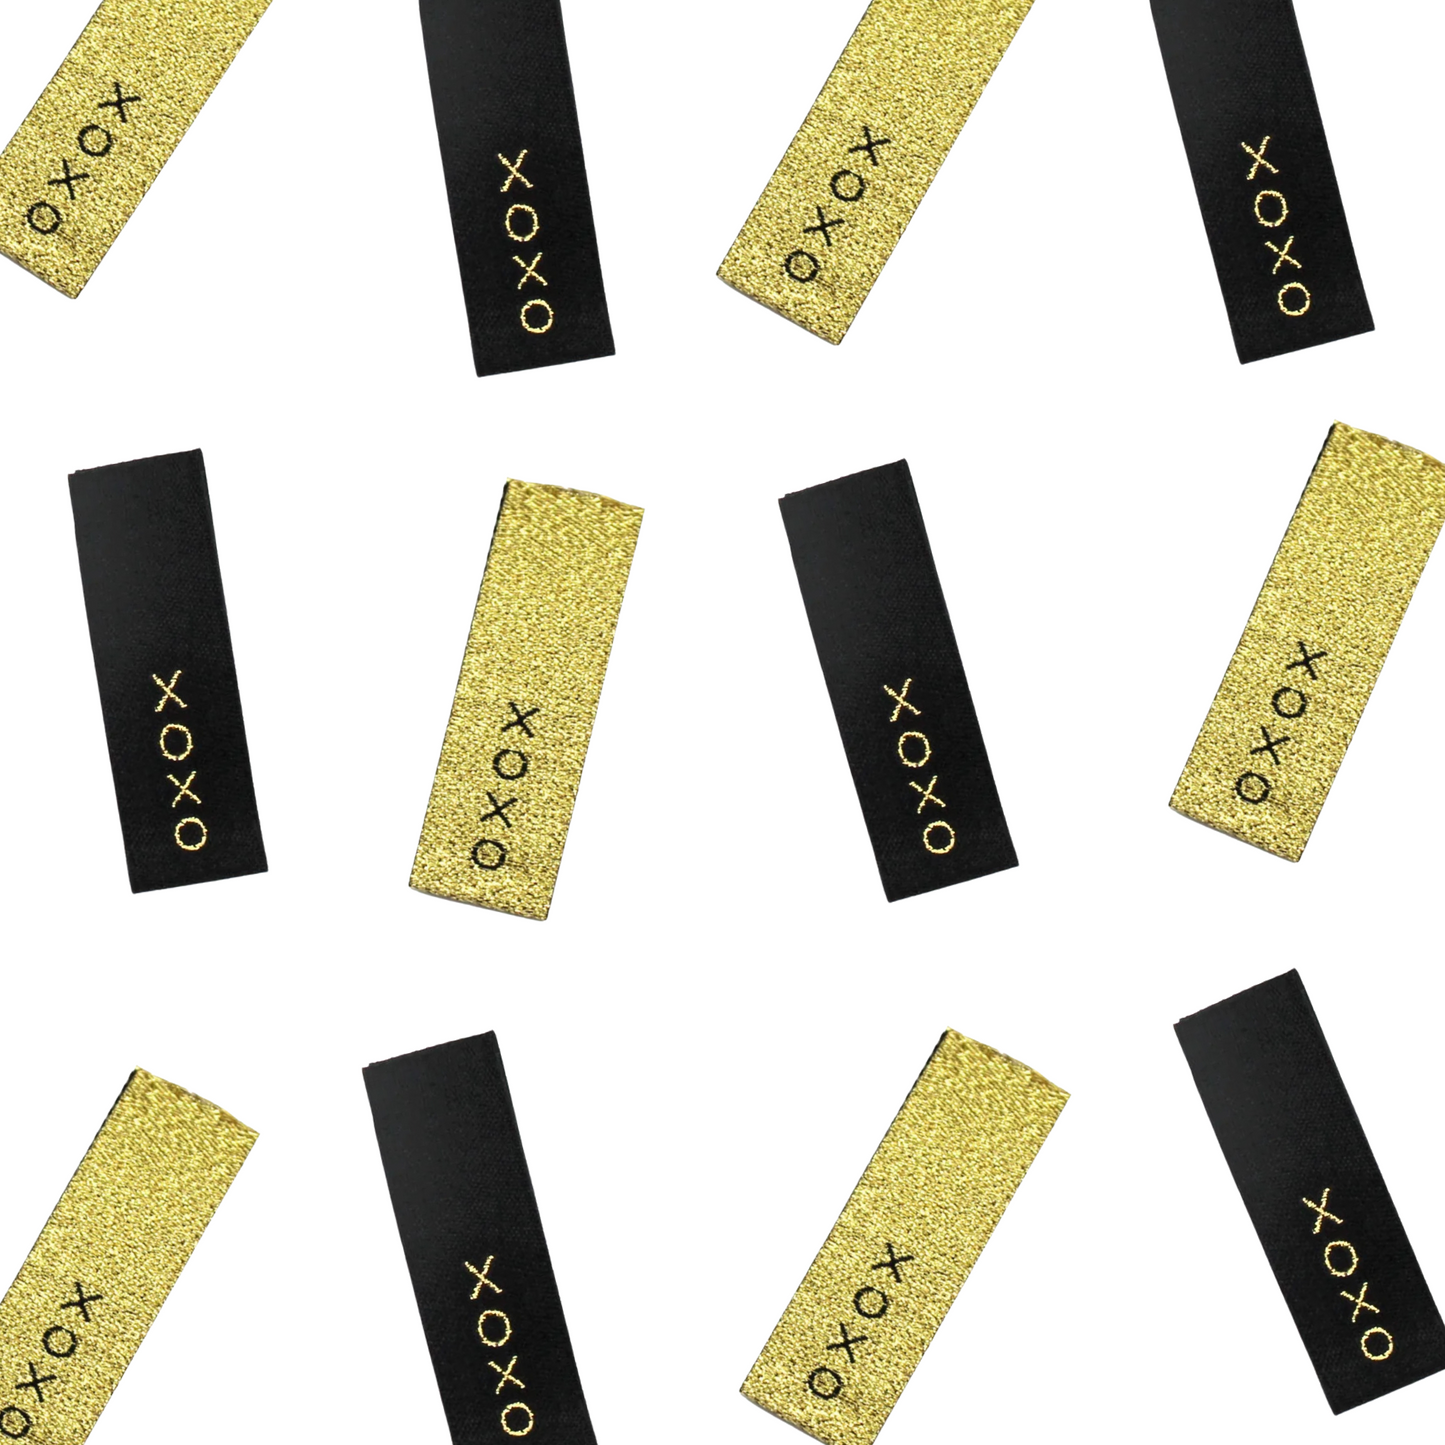 XOXO Metallic Black & Gold Multipack | Woven Sew In Labels